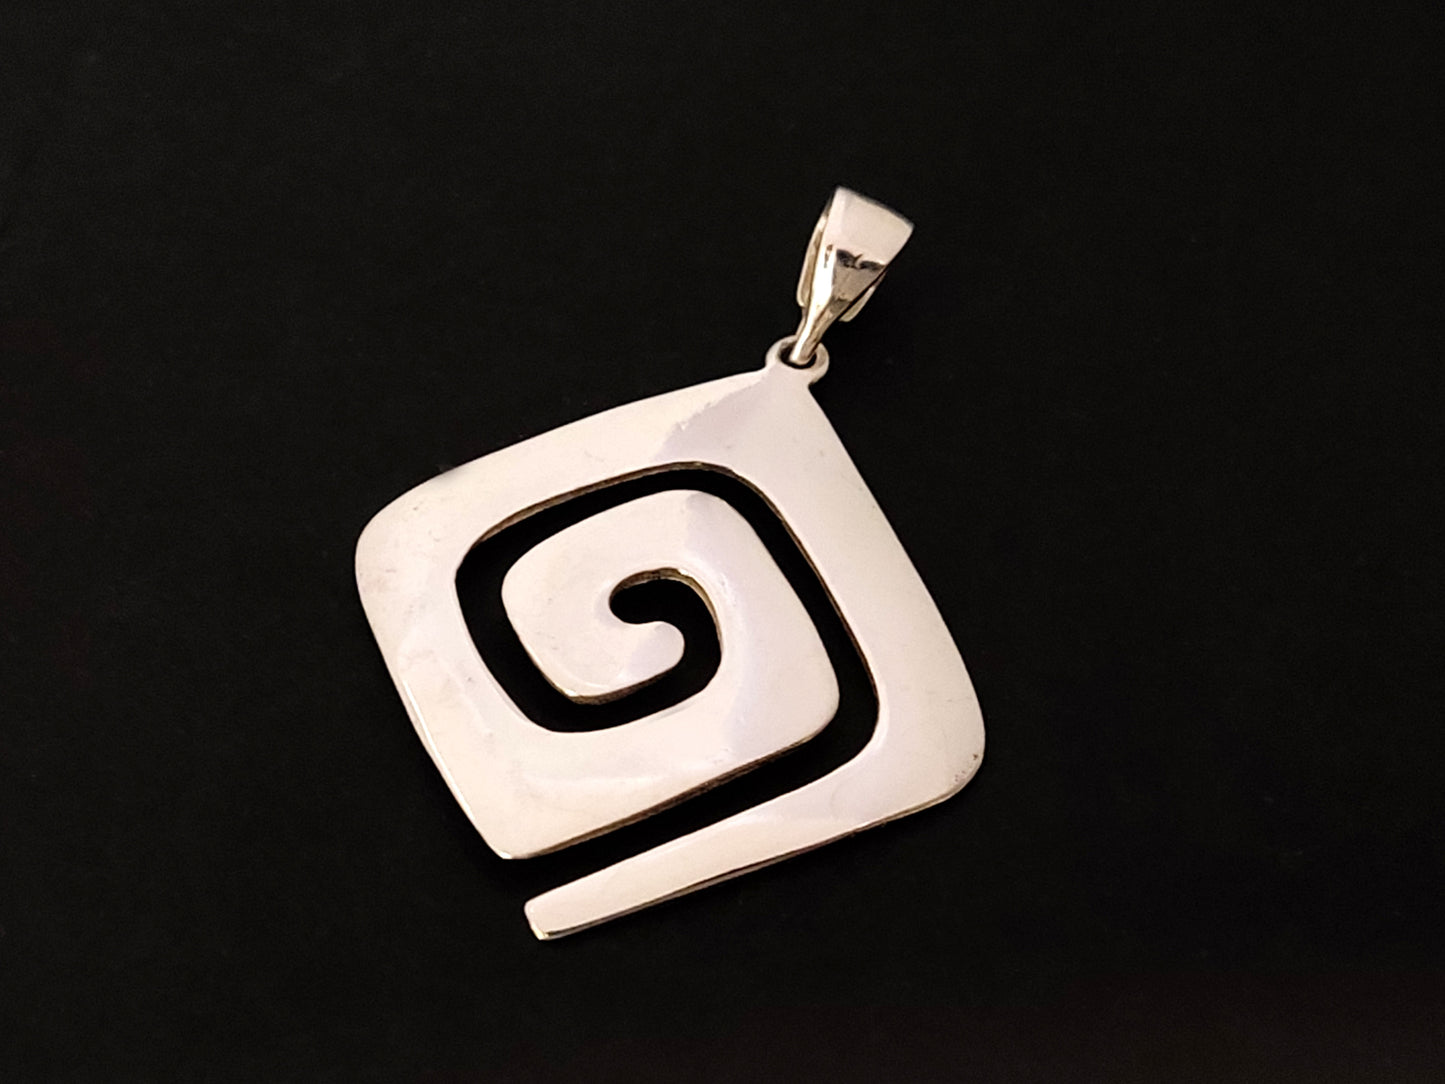 Spiral Greek Silver Pendant 23x23mm - Exquisite craftsmanship in an intricate and elegant design.